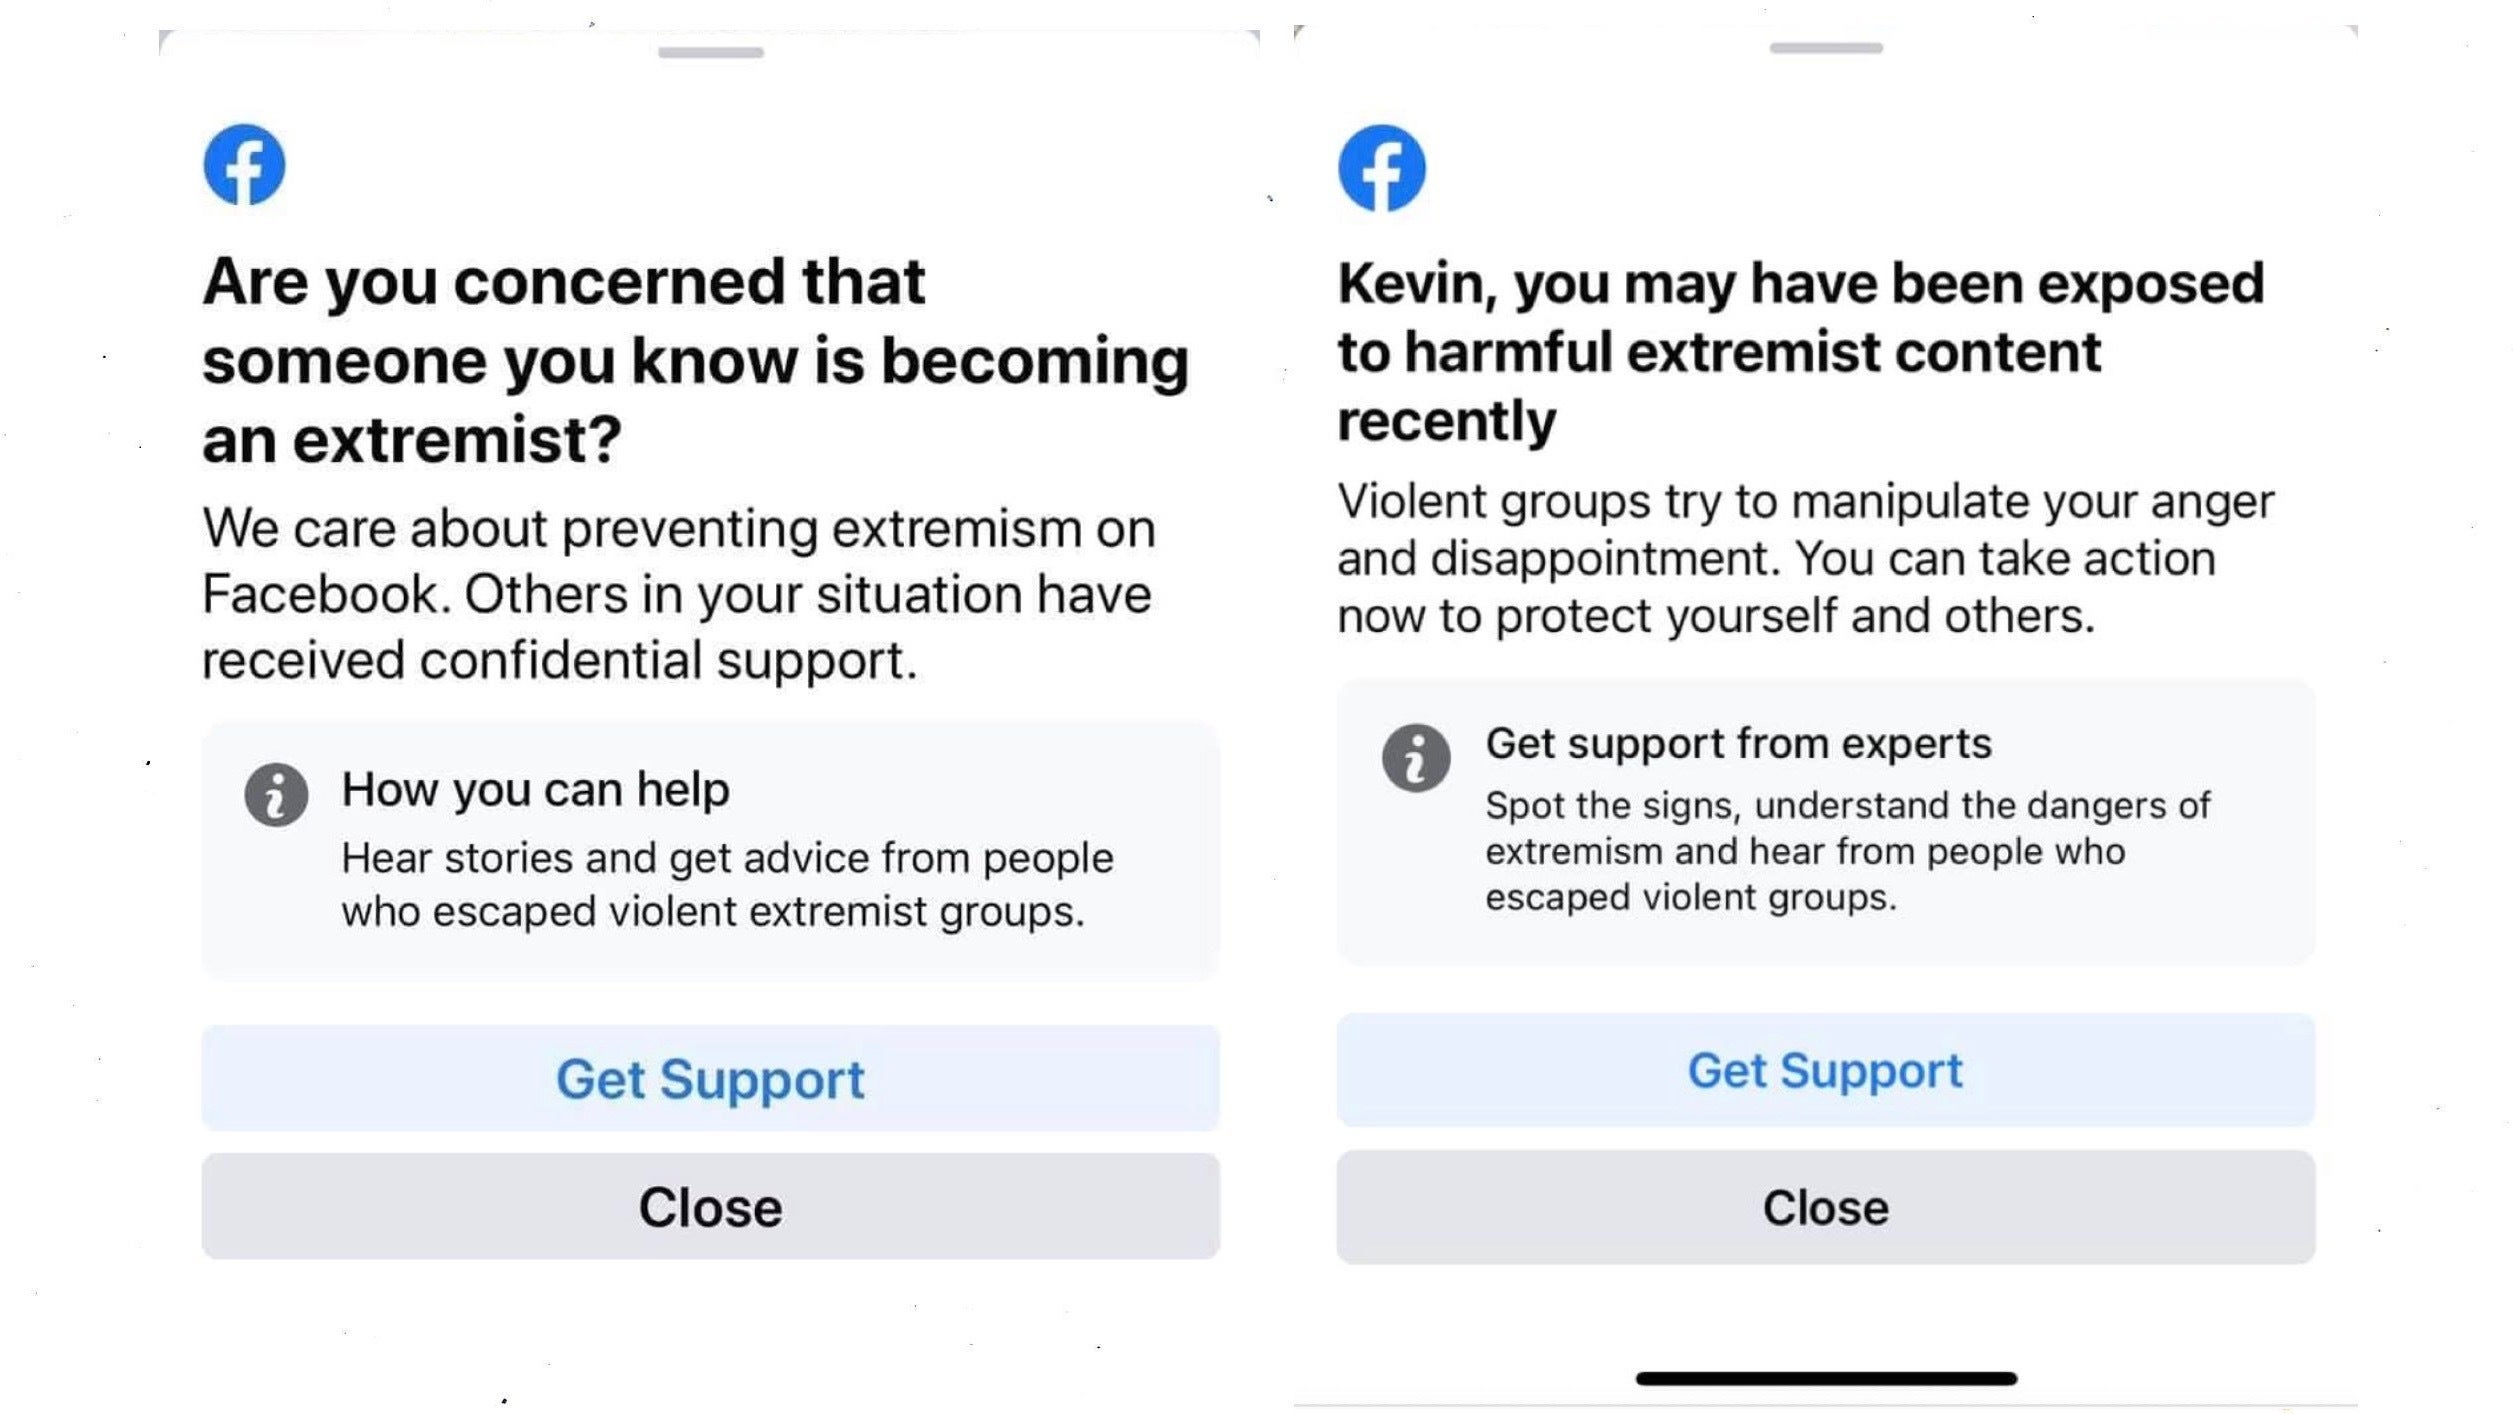 Image source - PCmag - Facebook wants to prevent you from becoming an extremist